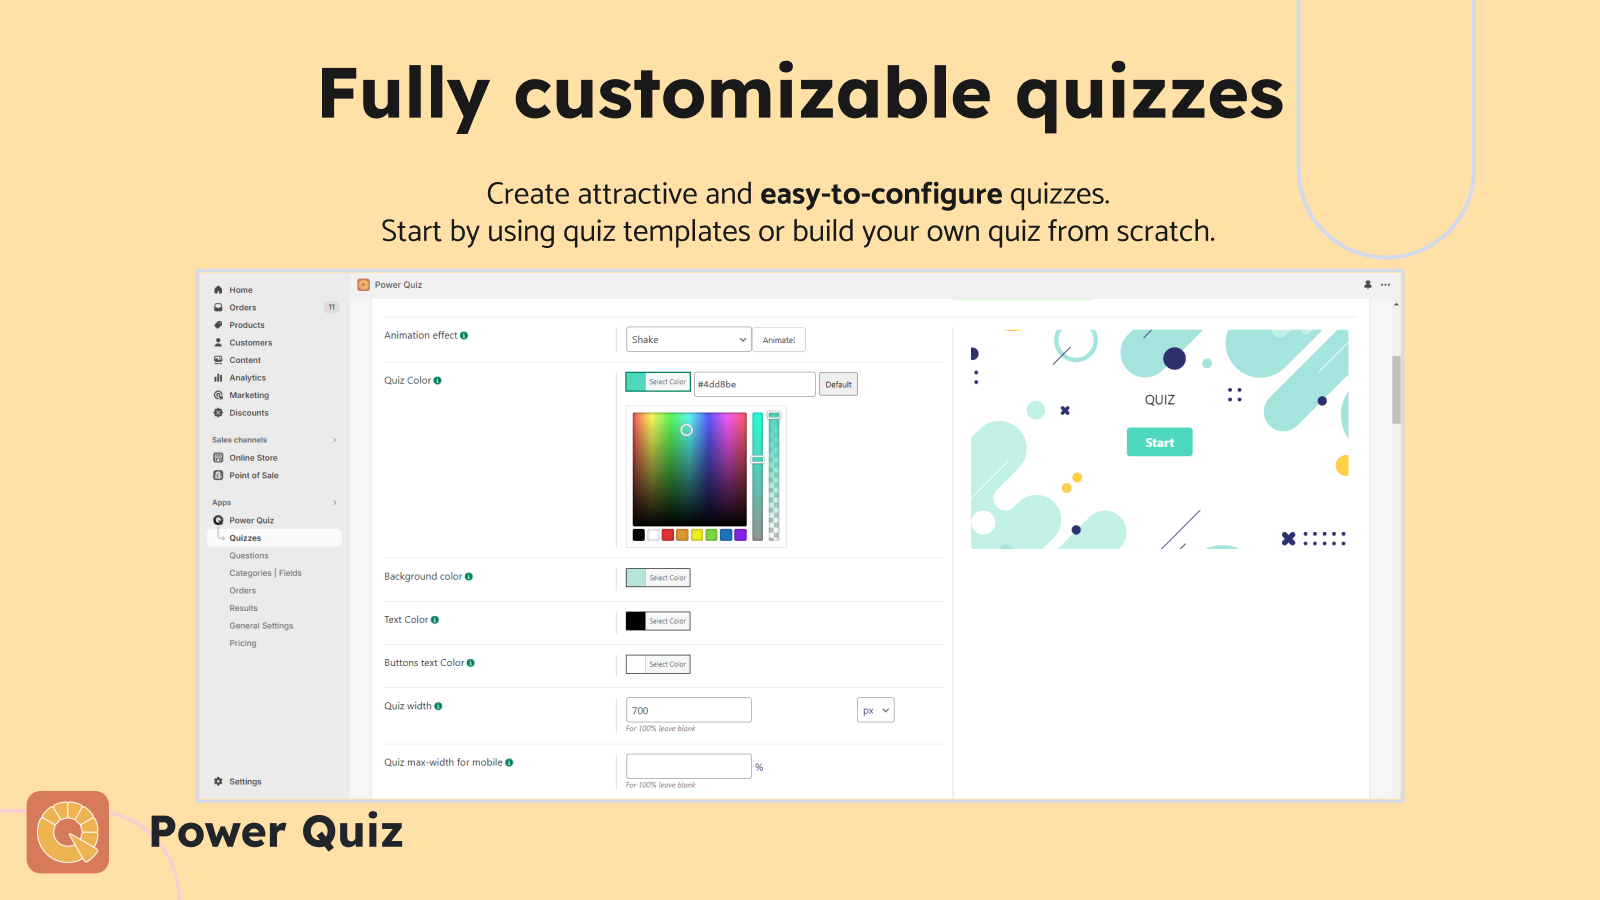 Create fully customizable quizzes for engaging user experiences.